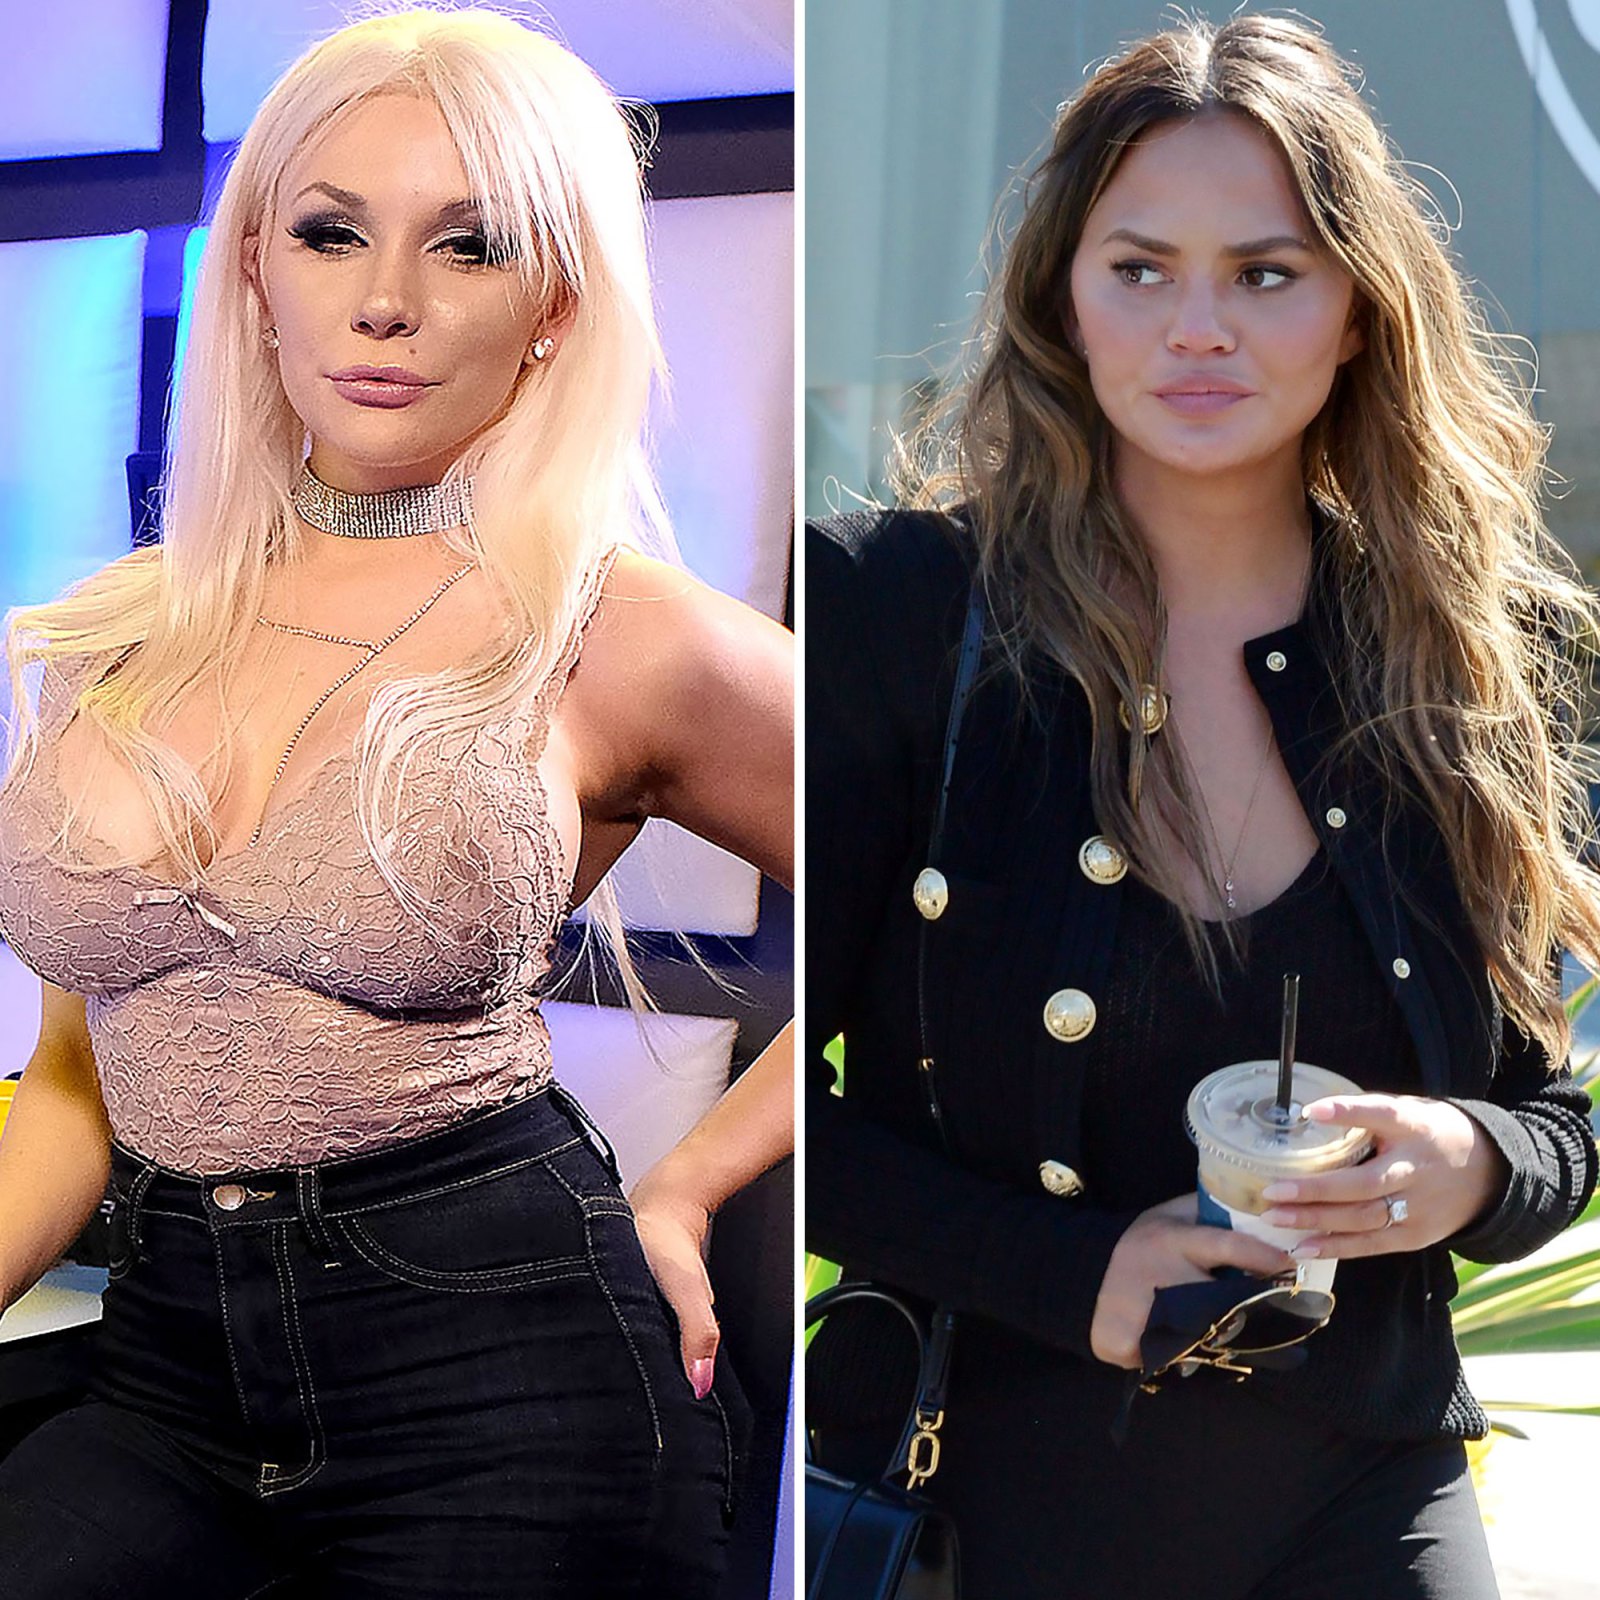 Courtney Stodden Disses Chrissy's 'Cancel Club' Complaint: 'Do Something'